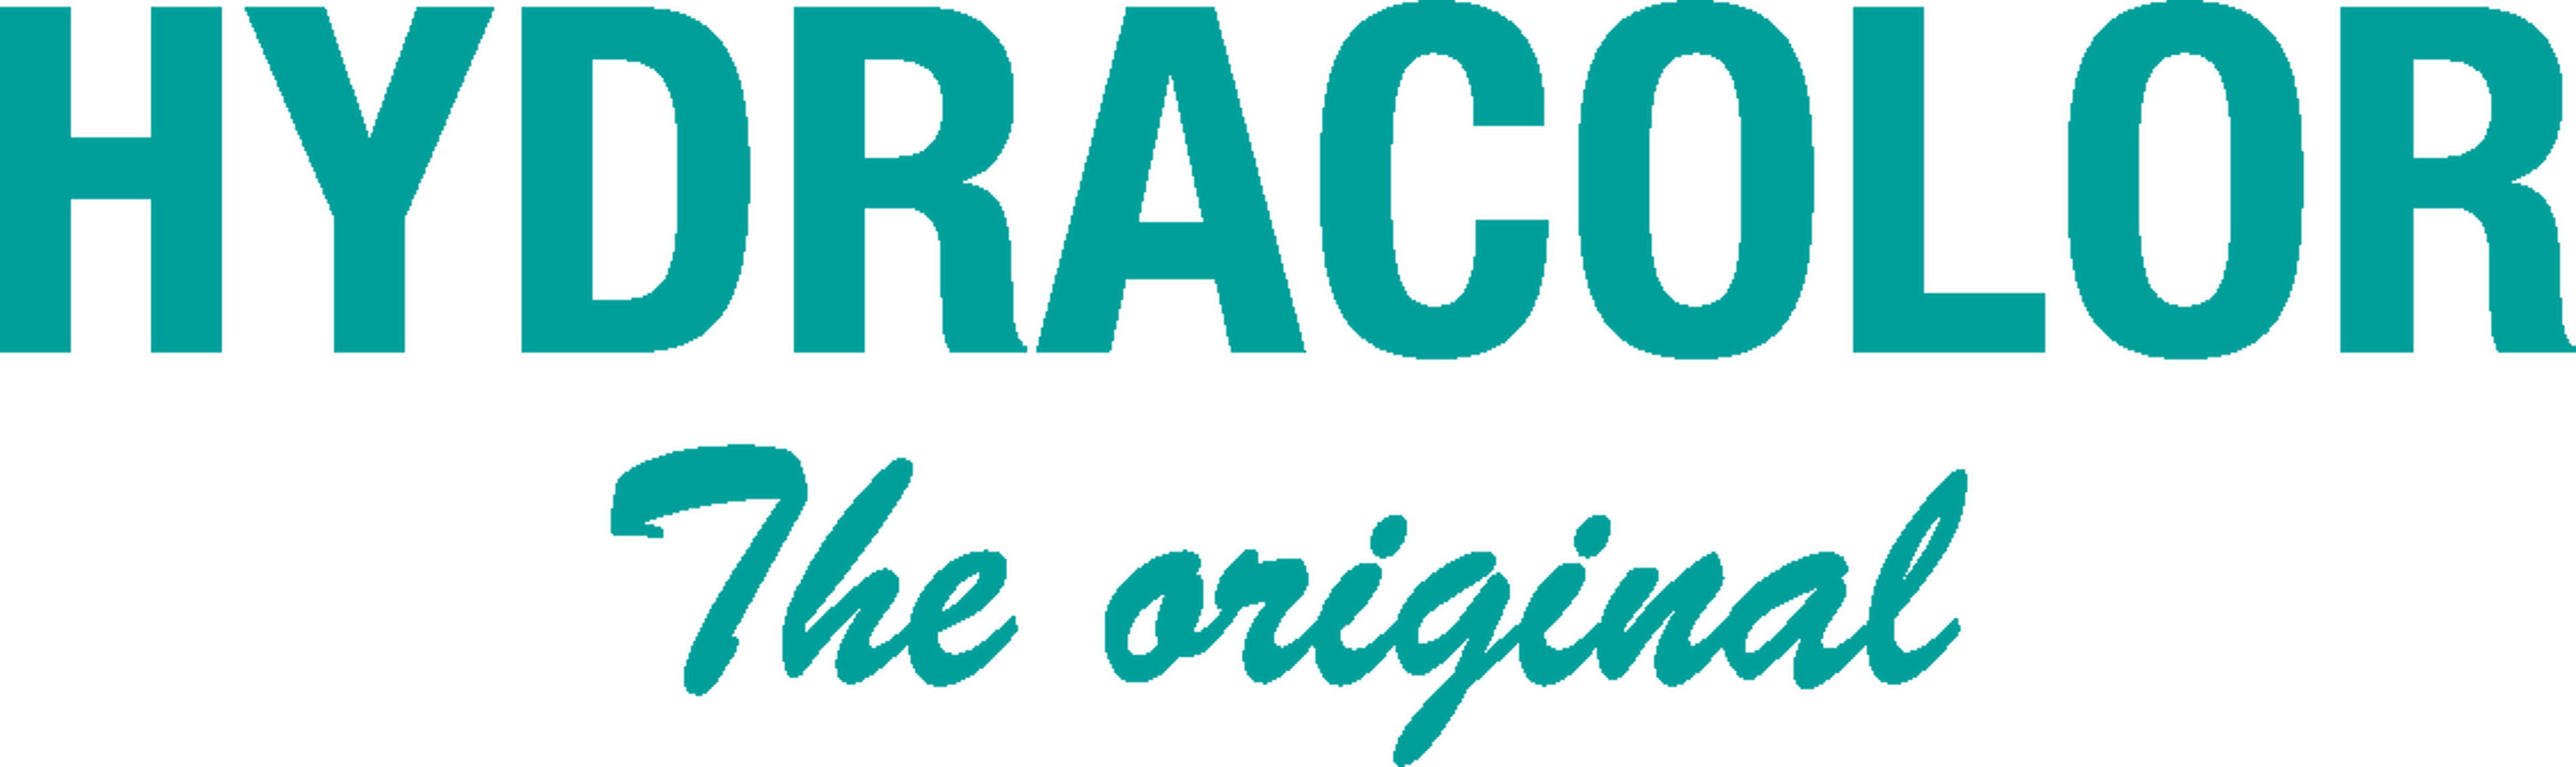 Hydracolor logotype